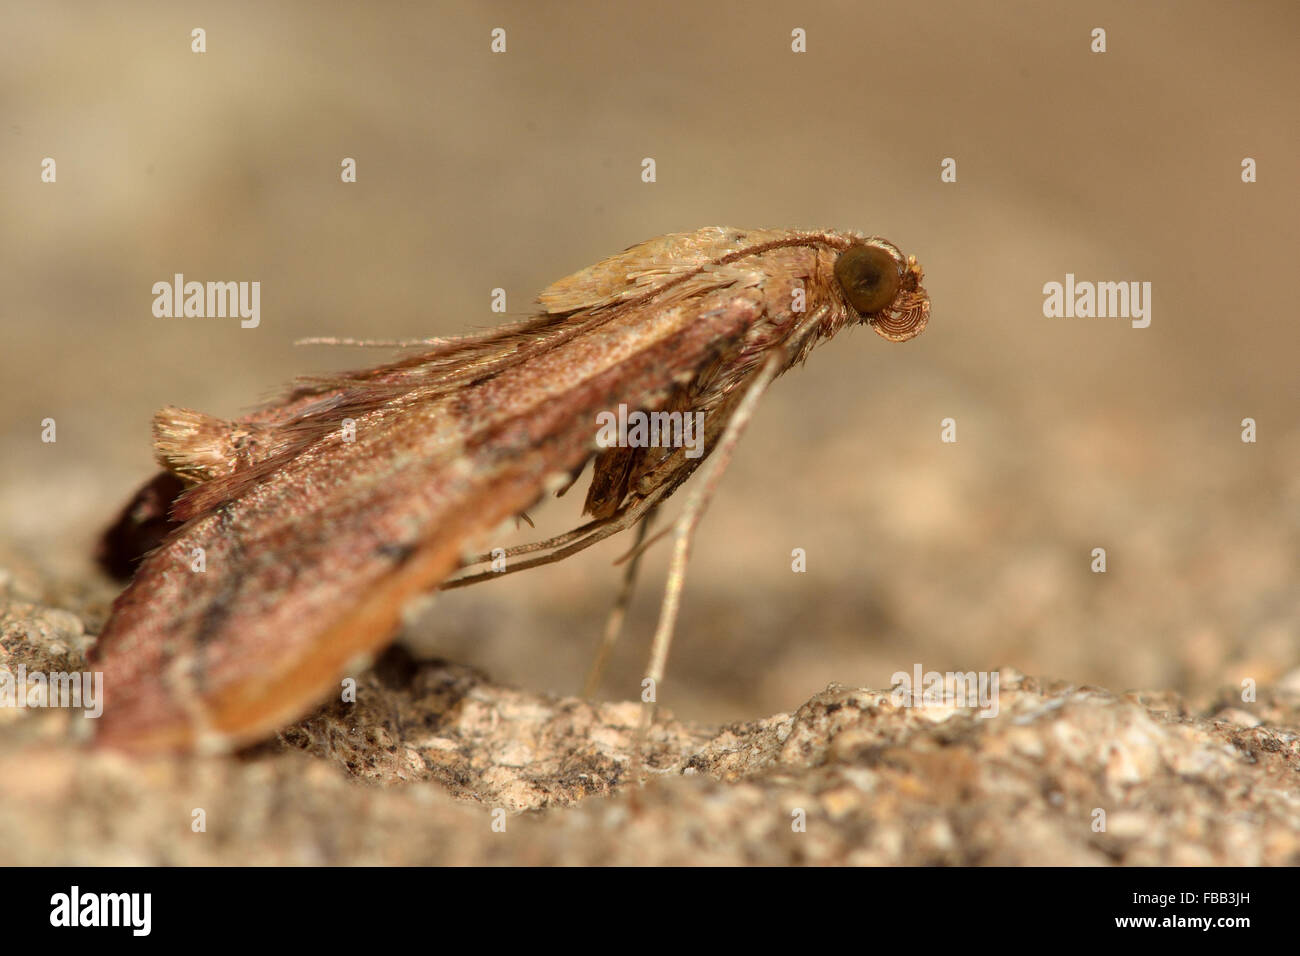 Endotricha flammealis moth. A micro moth in the family Pyralidae showing its typical resting position with abdomen raised Stock Photo